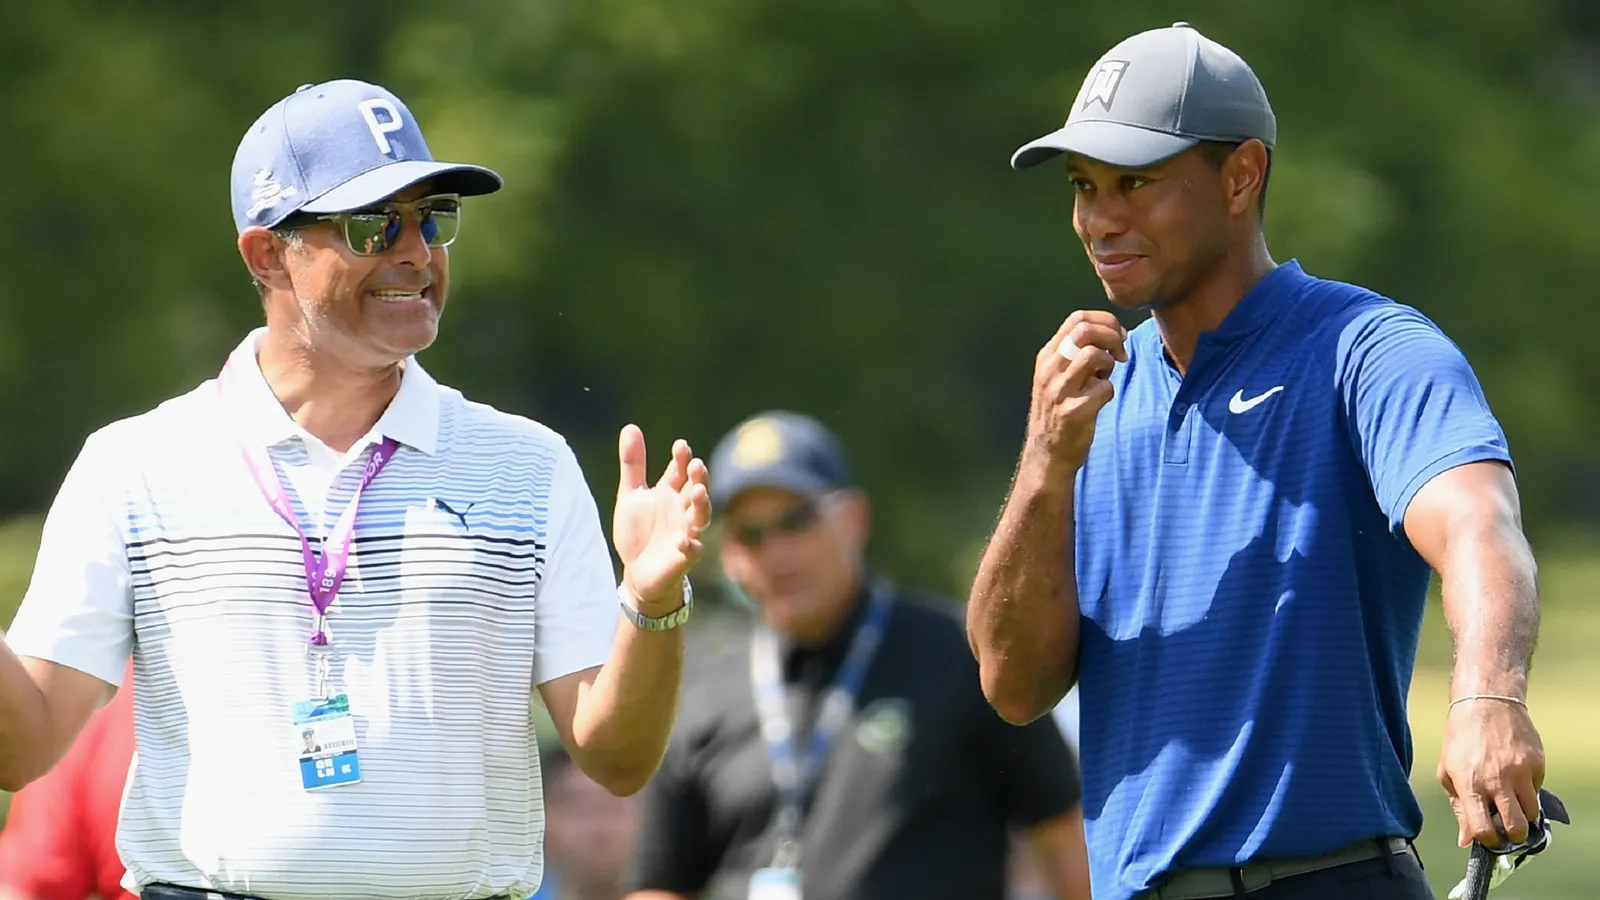 Claude Harmon takes aim at Tiger Woods as he defends Brooks Koepka's LIV move